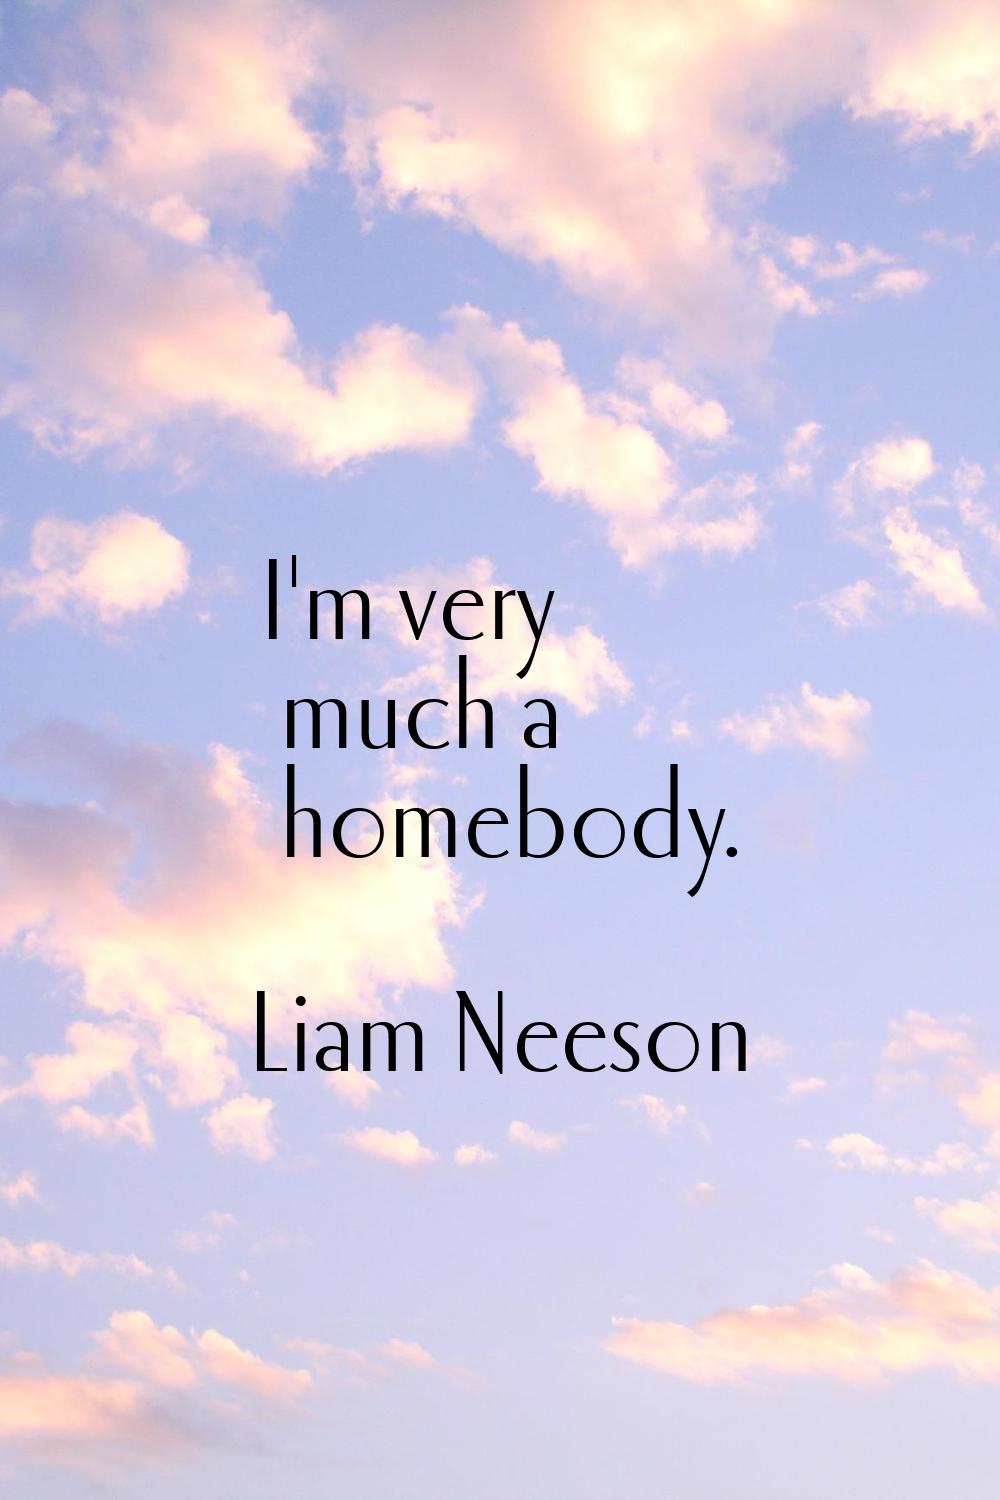 I'm very much a homebody.